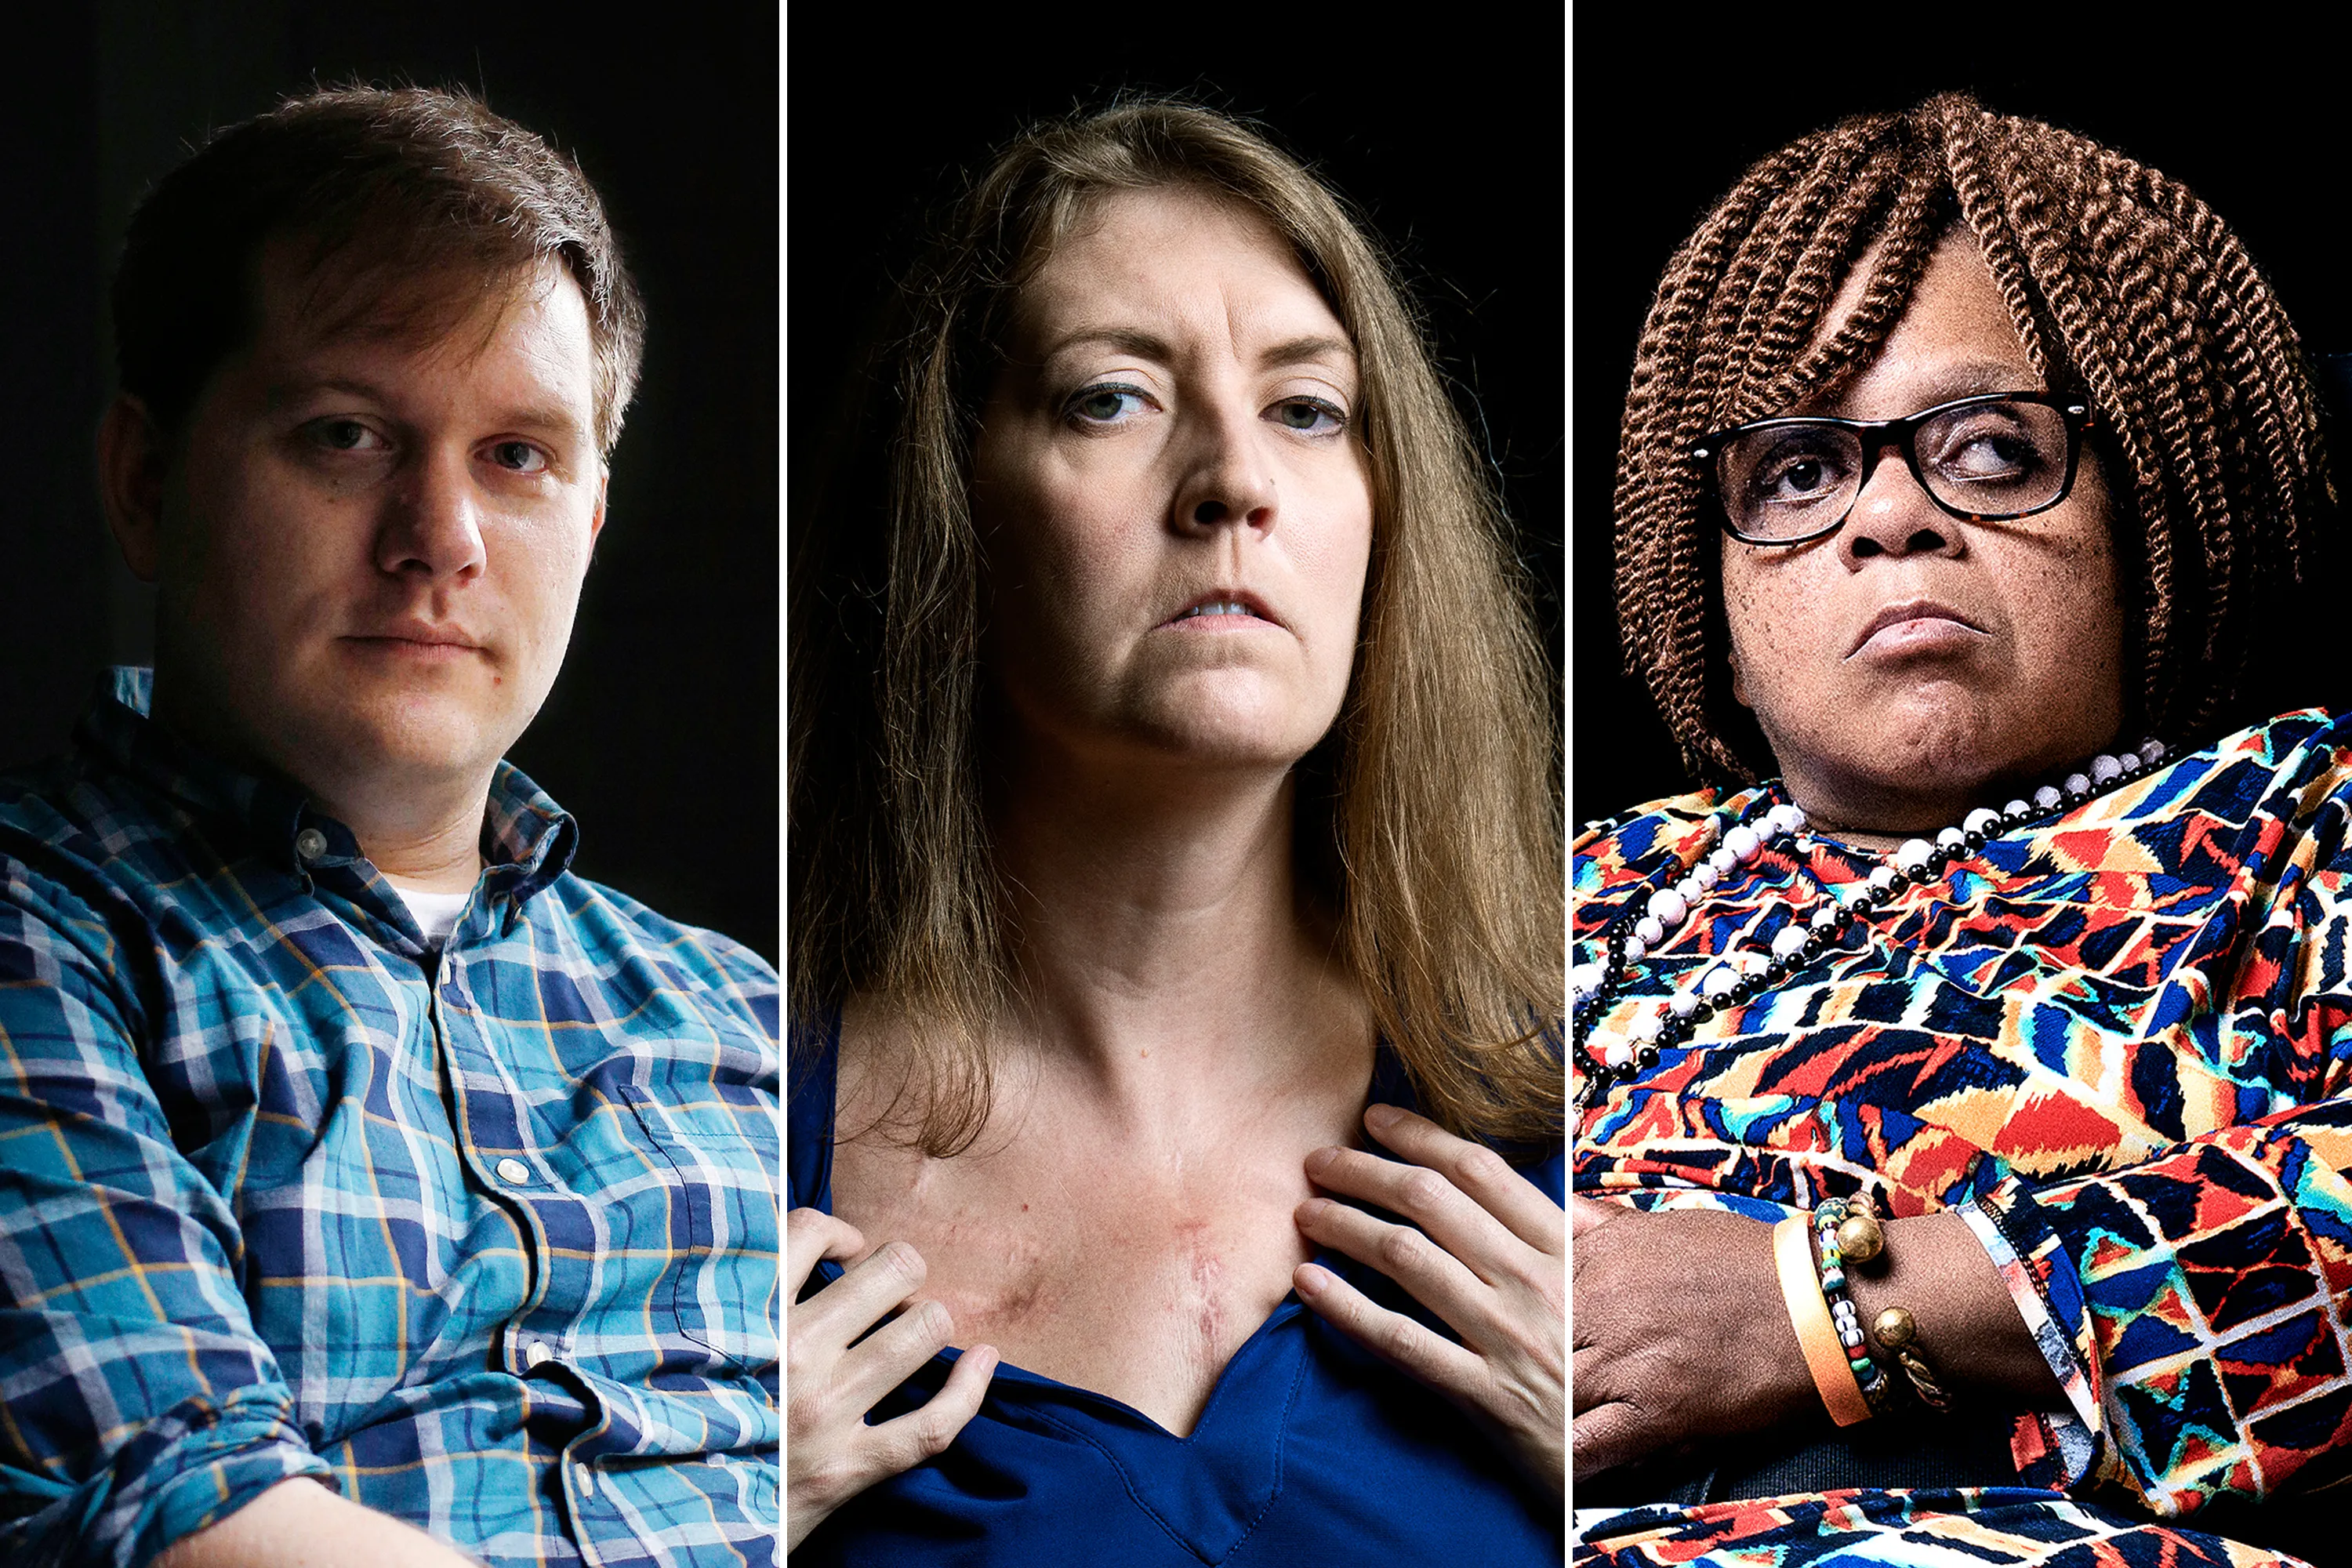 These Are the Faces of People With Pre-Existing Conditions. They're Terrified of the Future